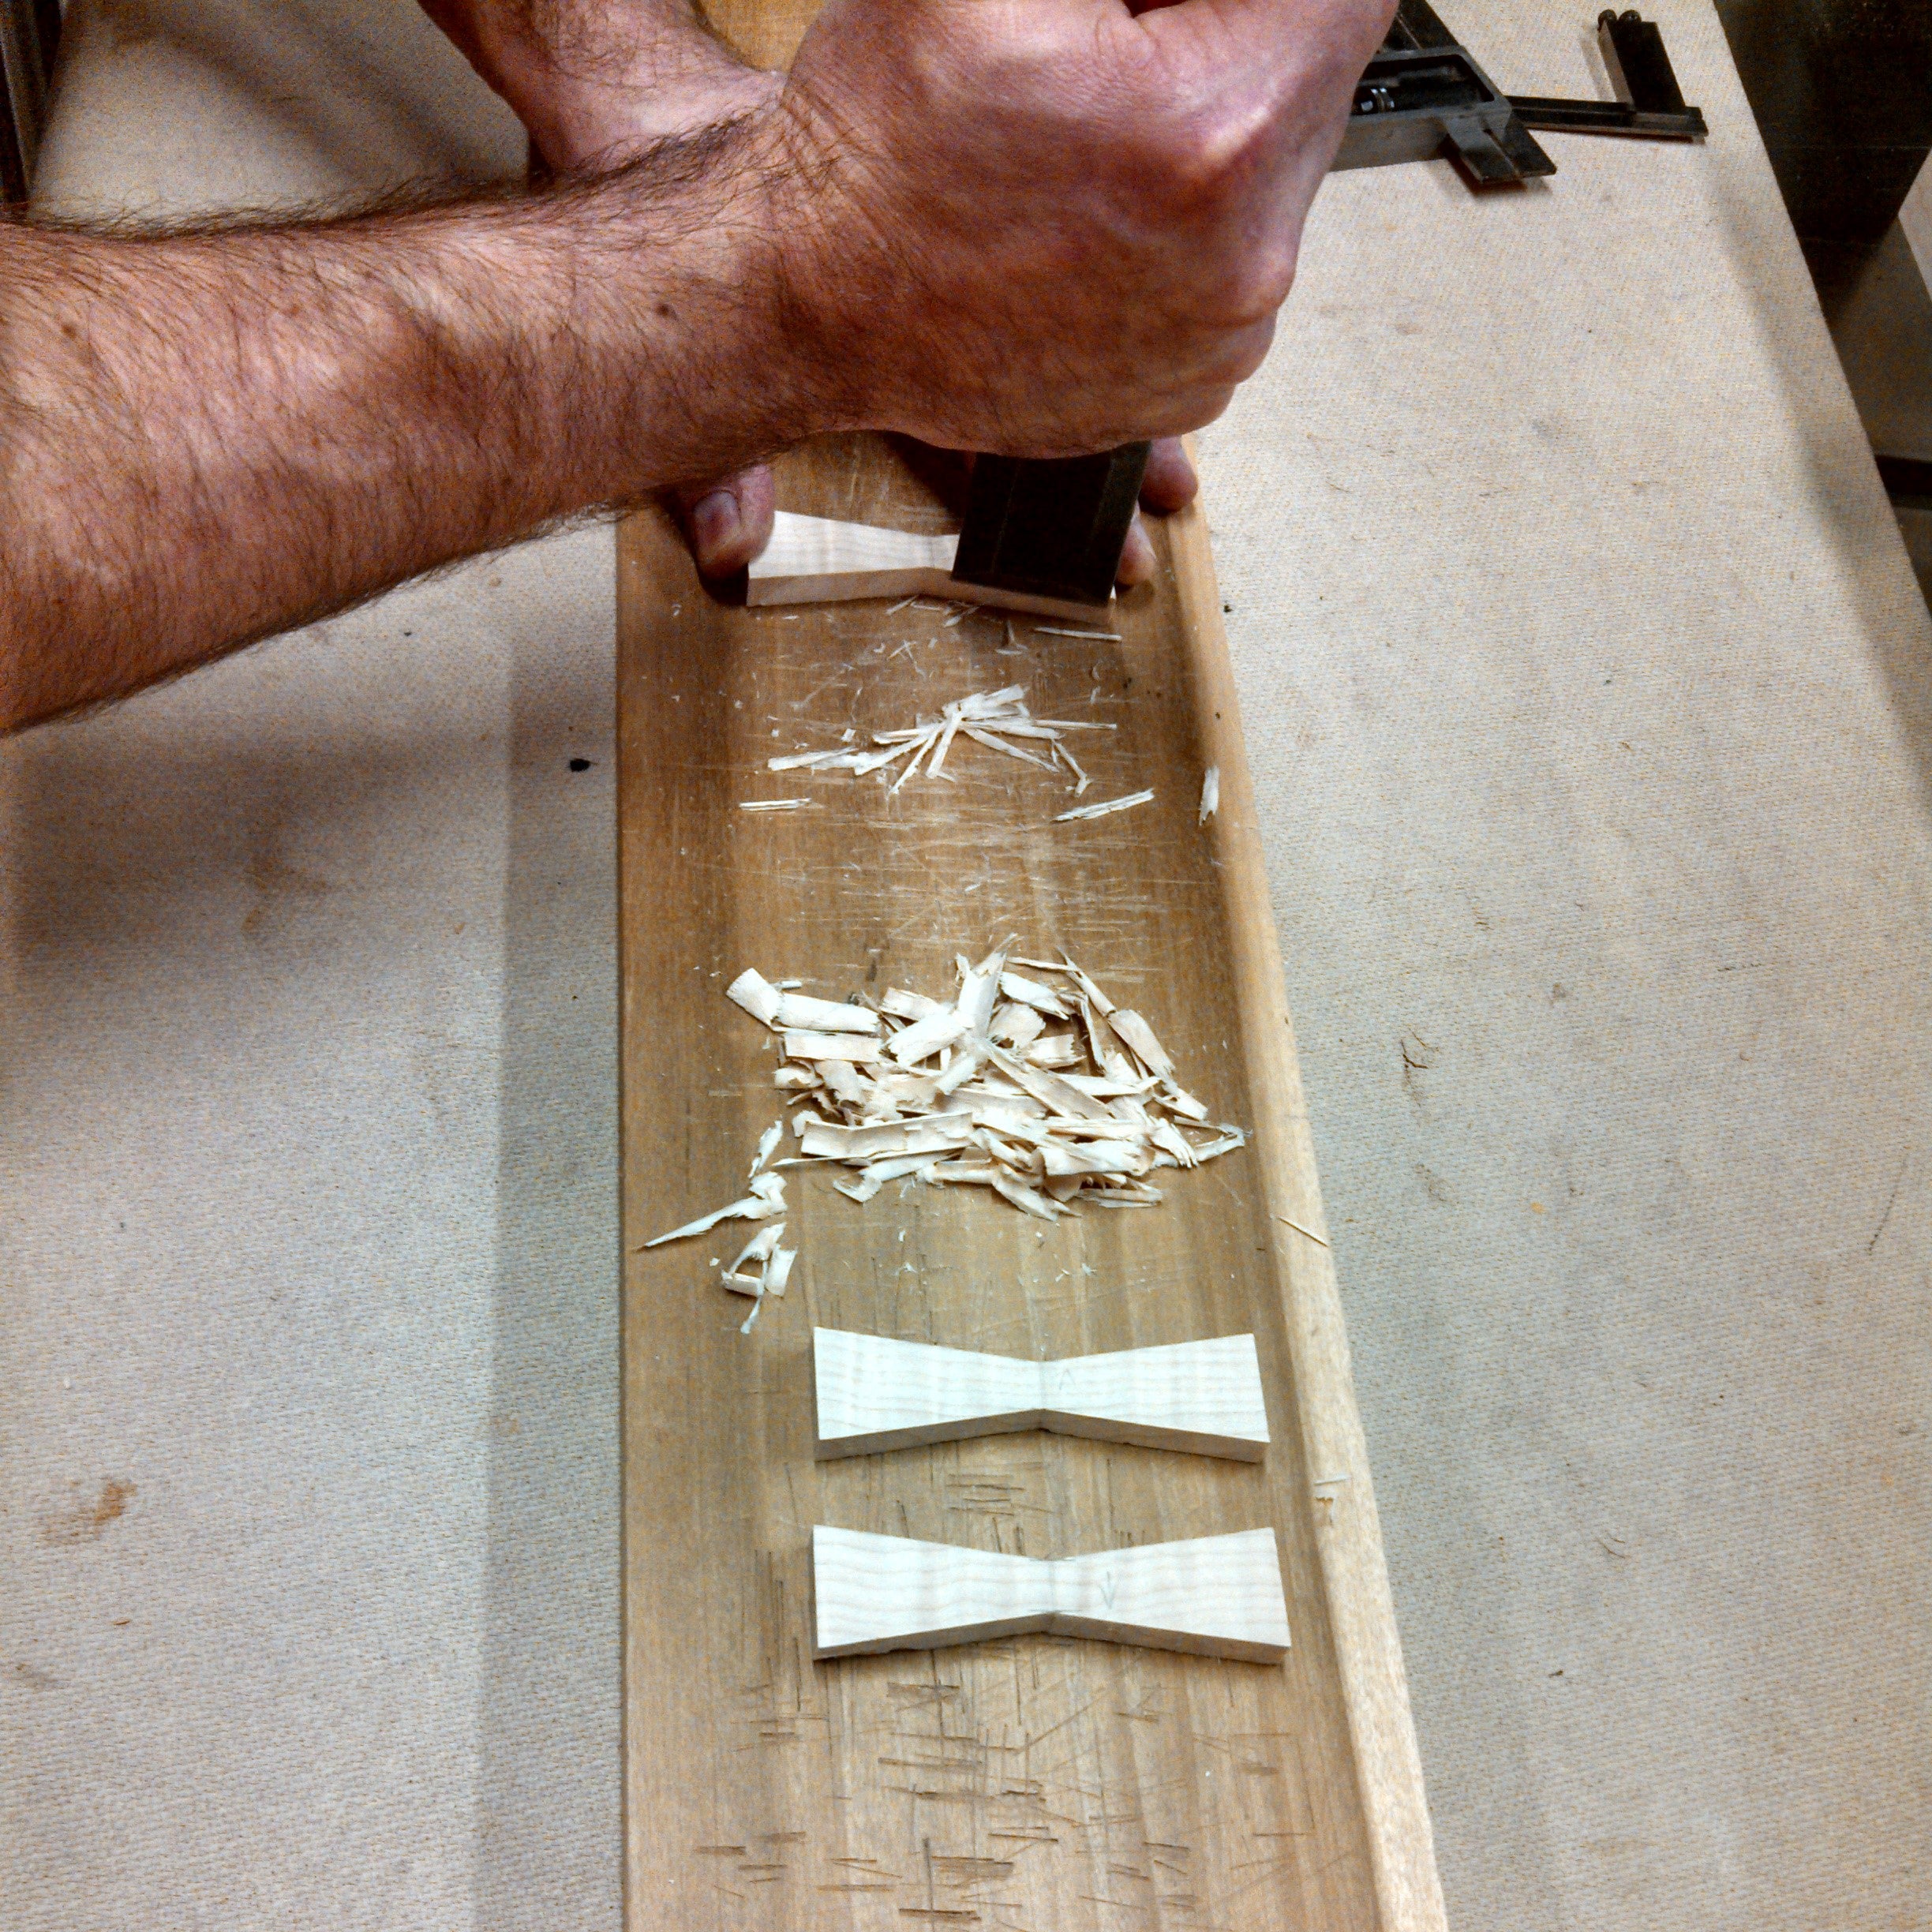 A furniture maker cuts butterfly key inlays with a chisel for a contemporary side table.